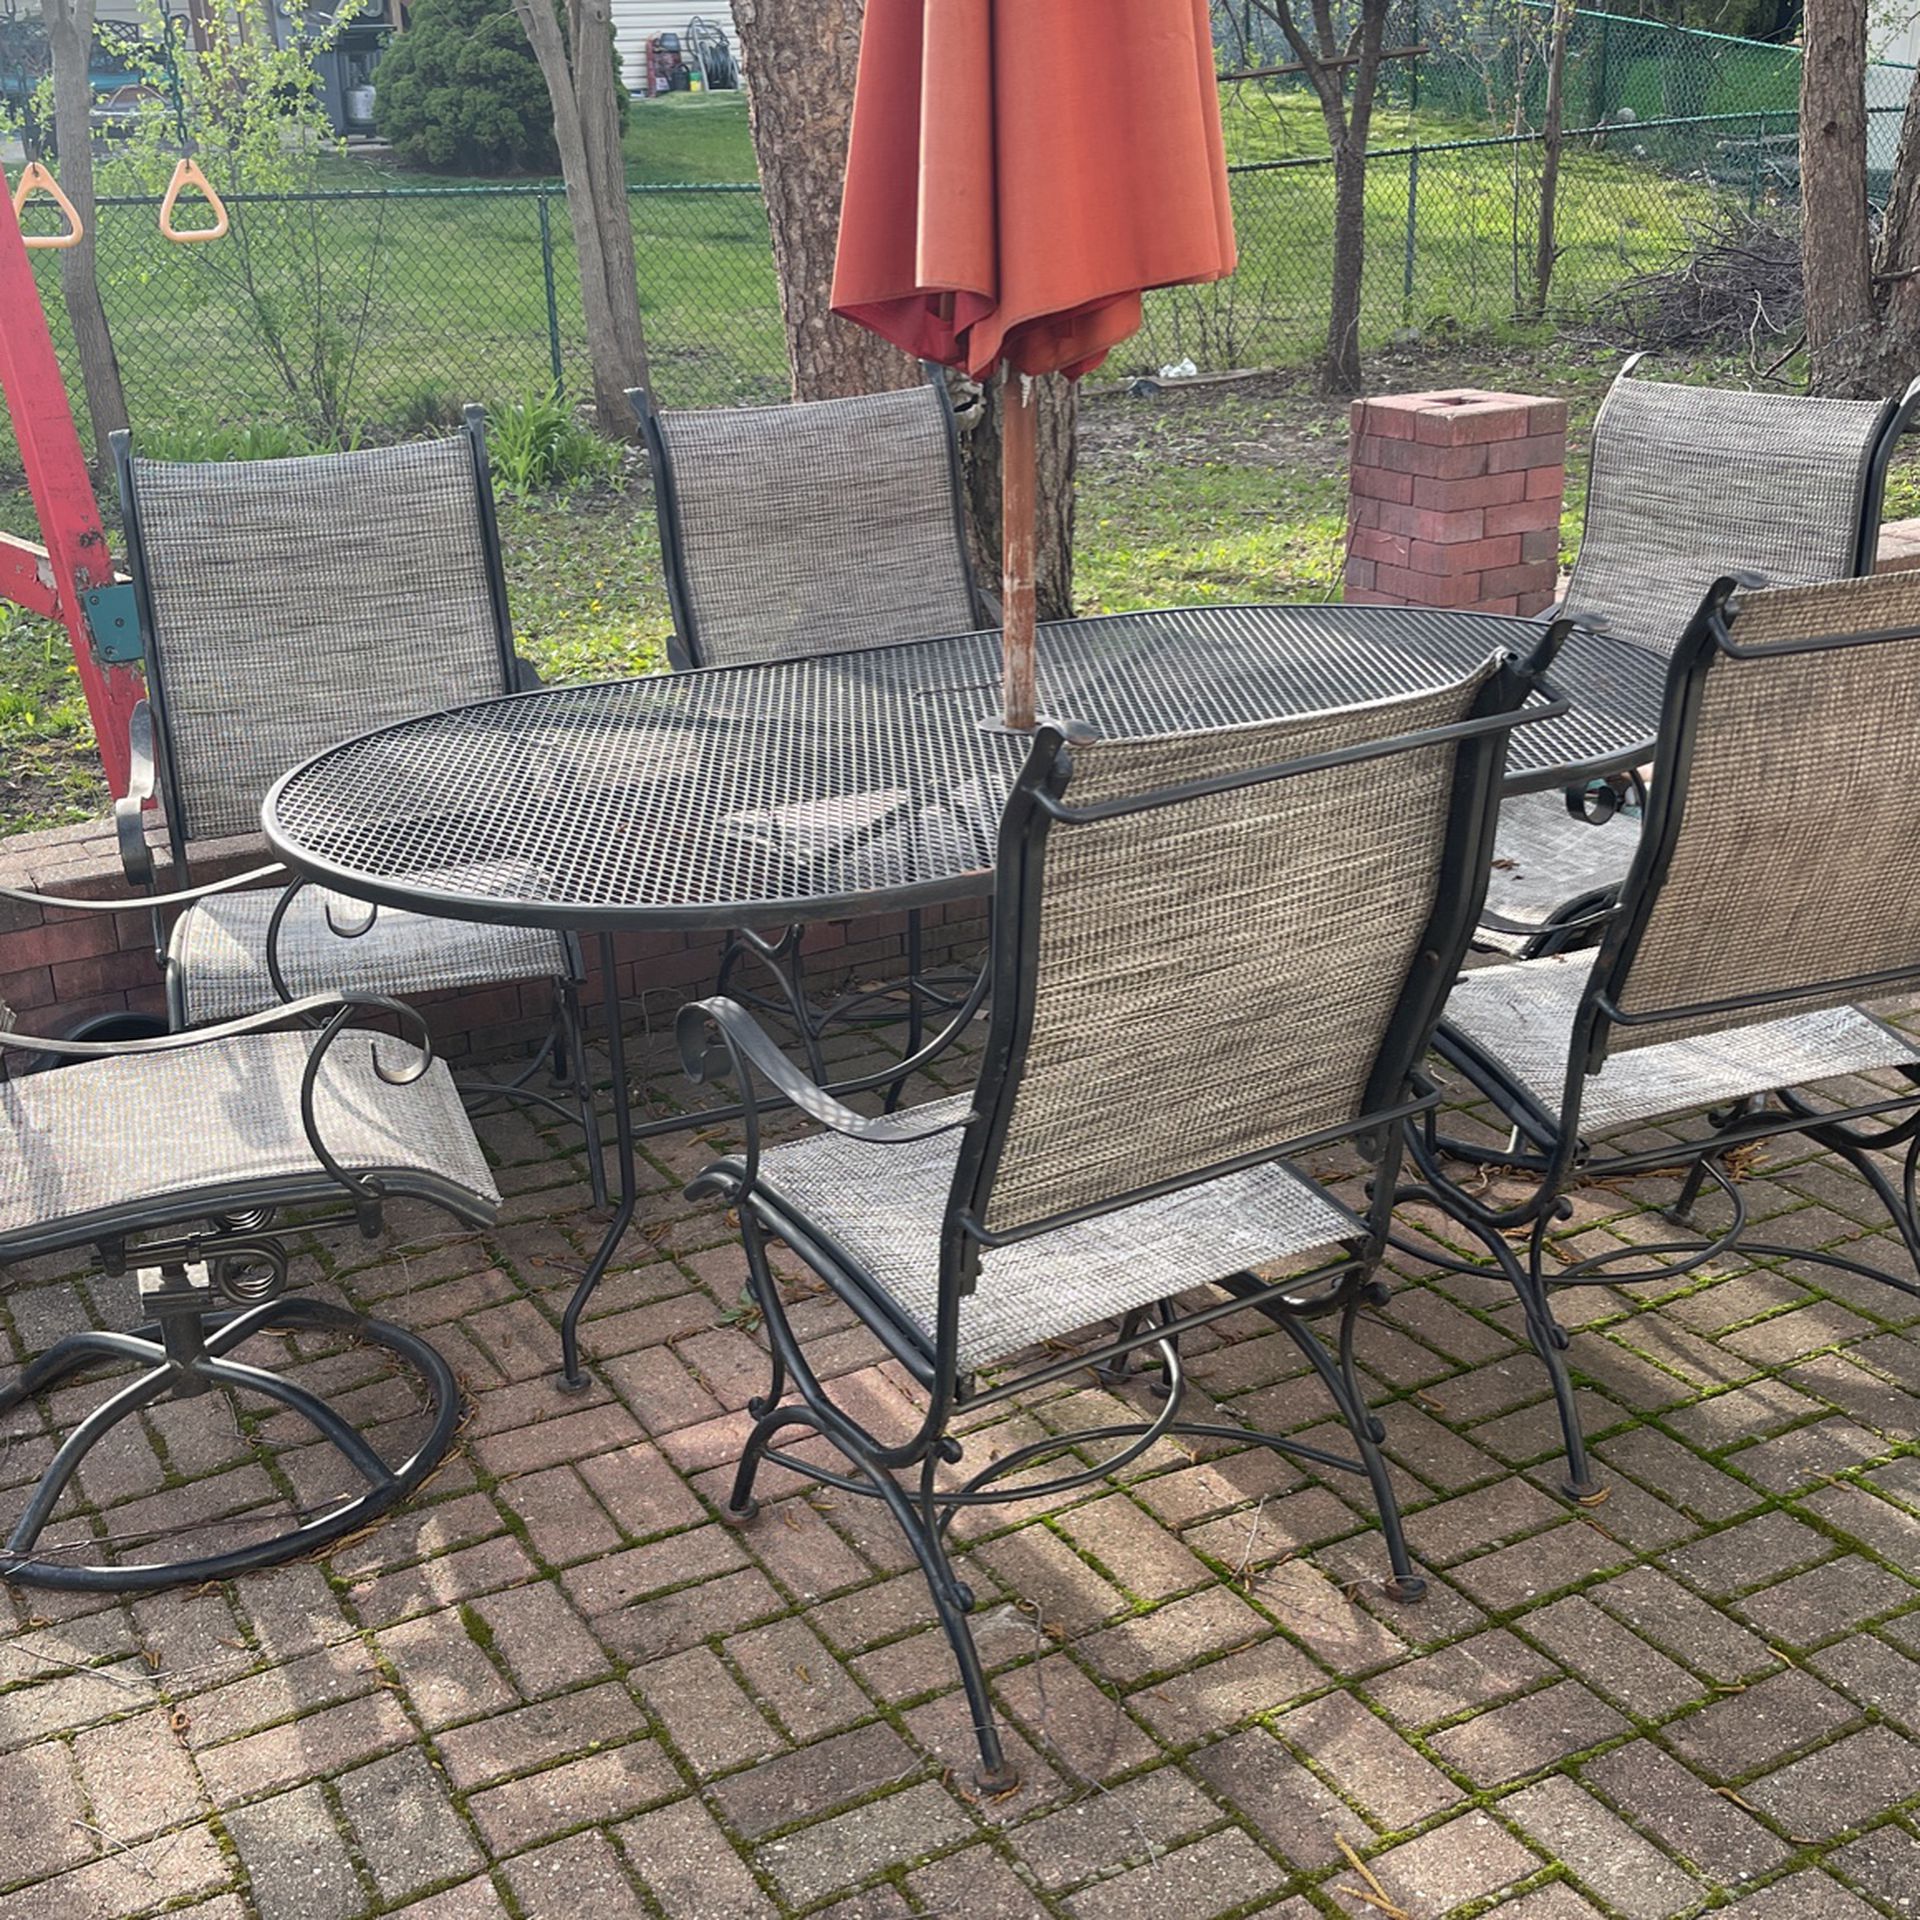 Metal 6ft Backyard Table And 6 Chairs (read Description)